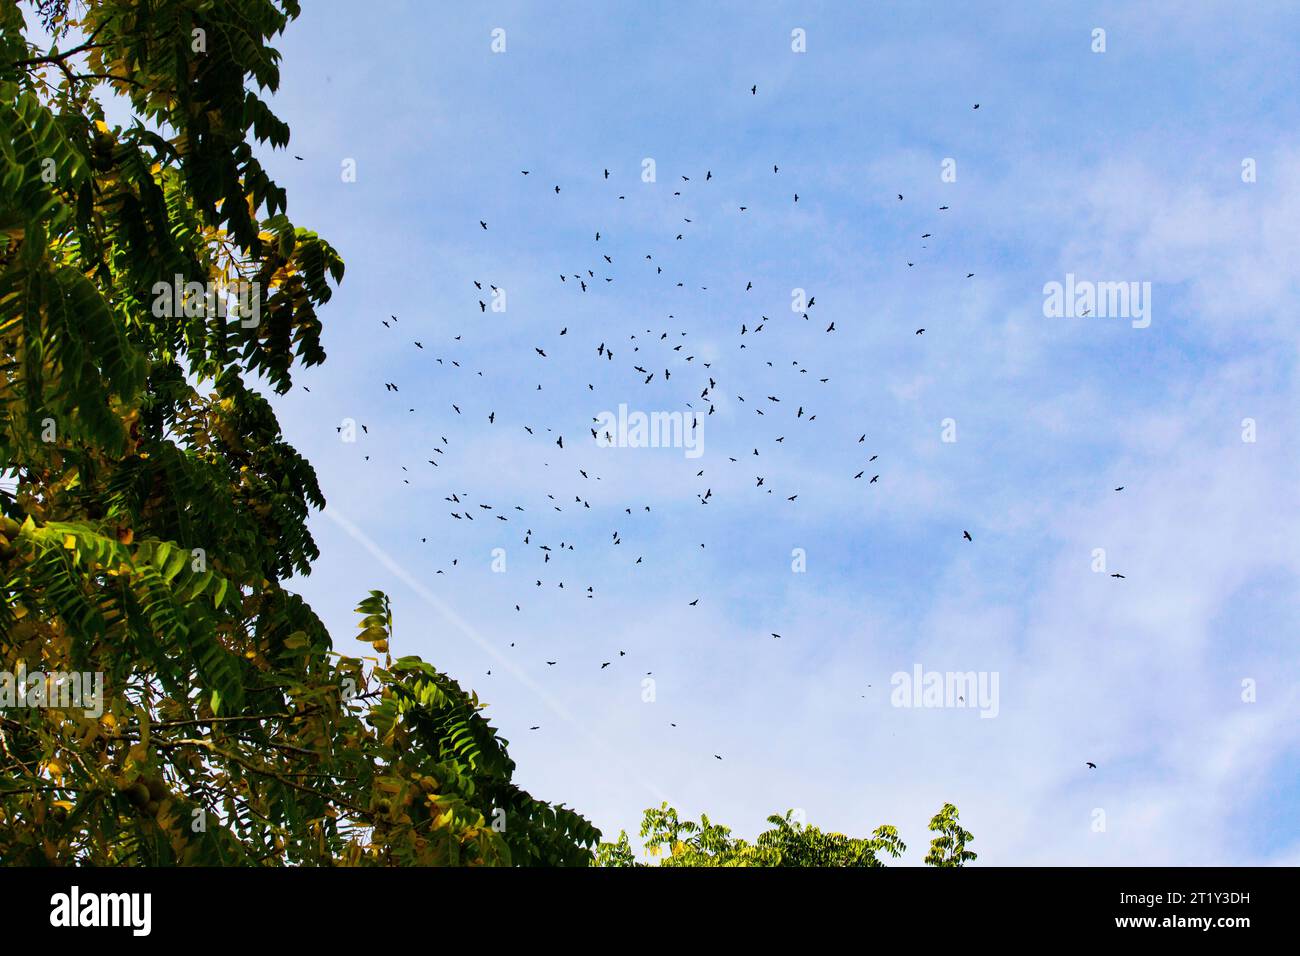 silhouette of bird cluster in flight against a blue sky backdrop Stock Photo